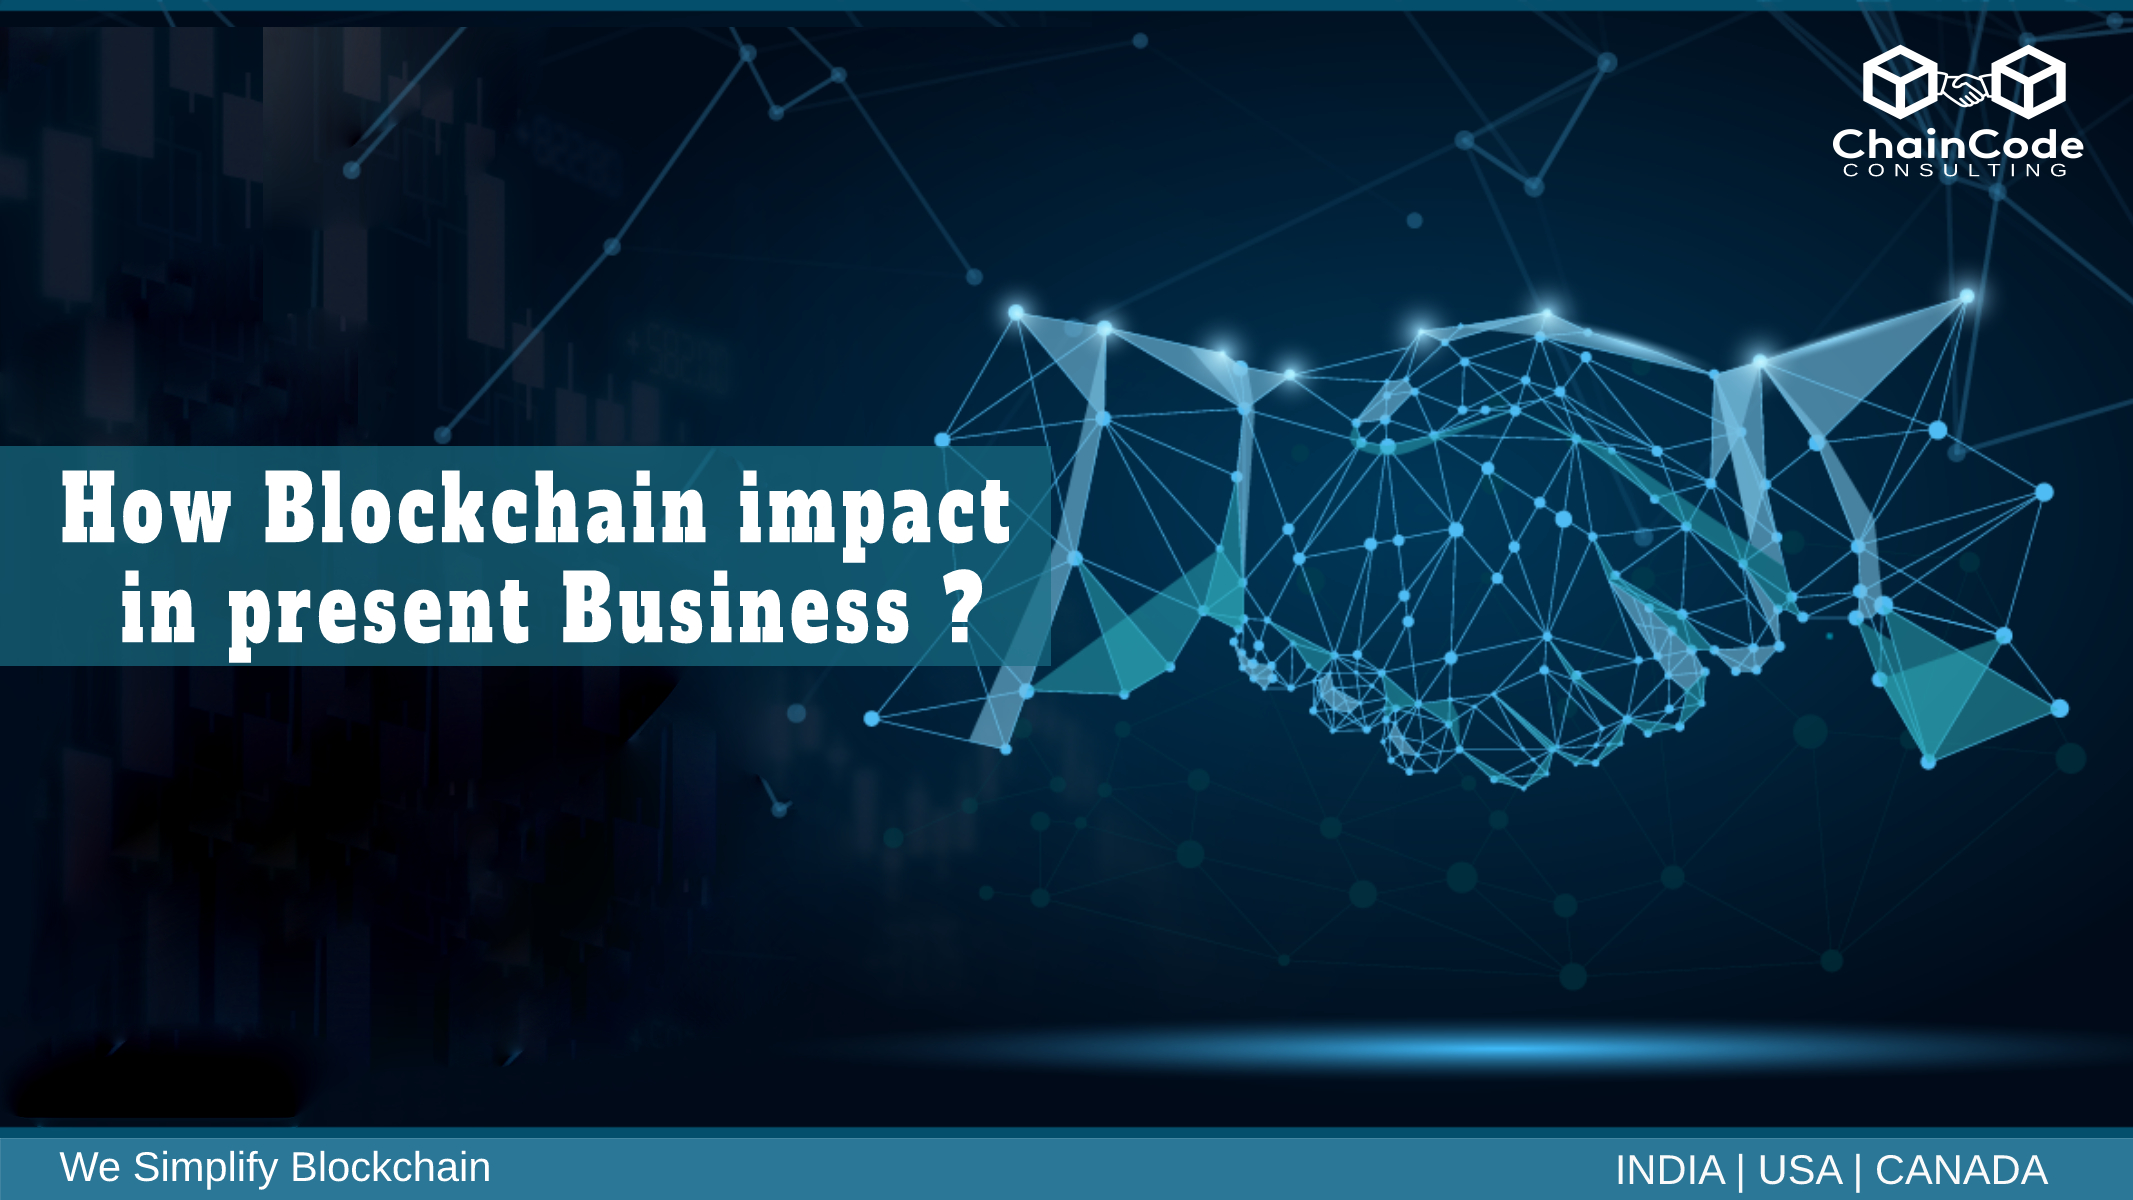 How does blockchain equip the present business models